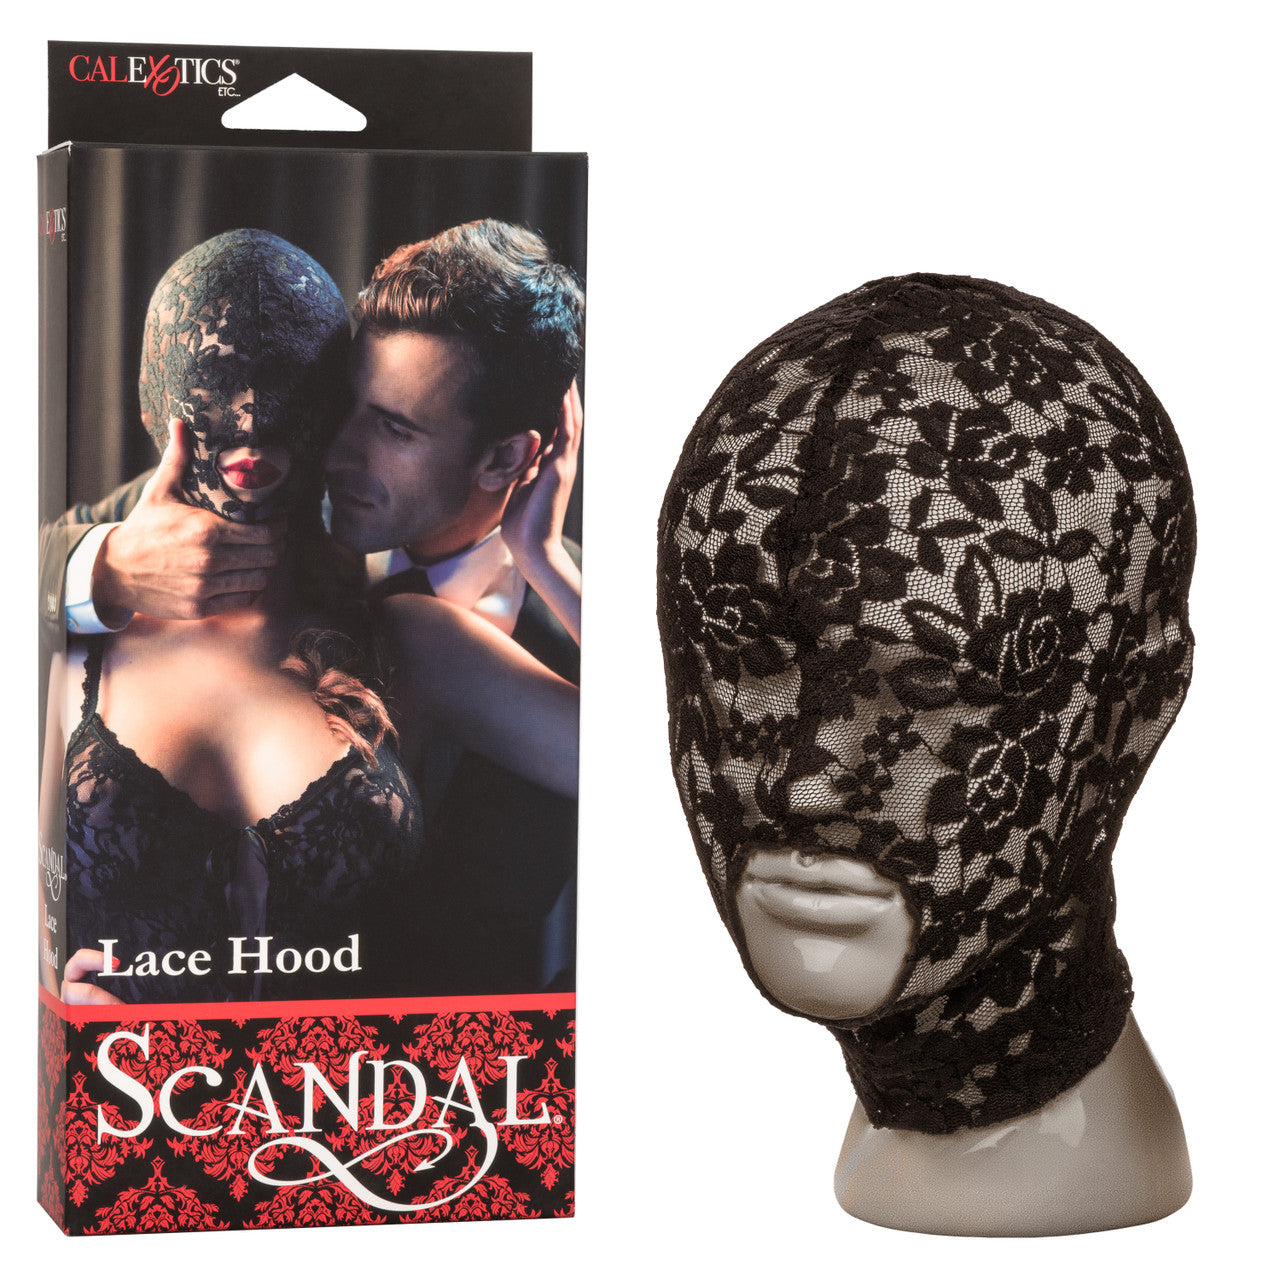 Scandal Lace Hood - Thorn & Feather Sex Toy Canada